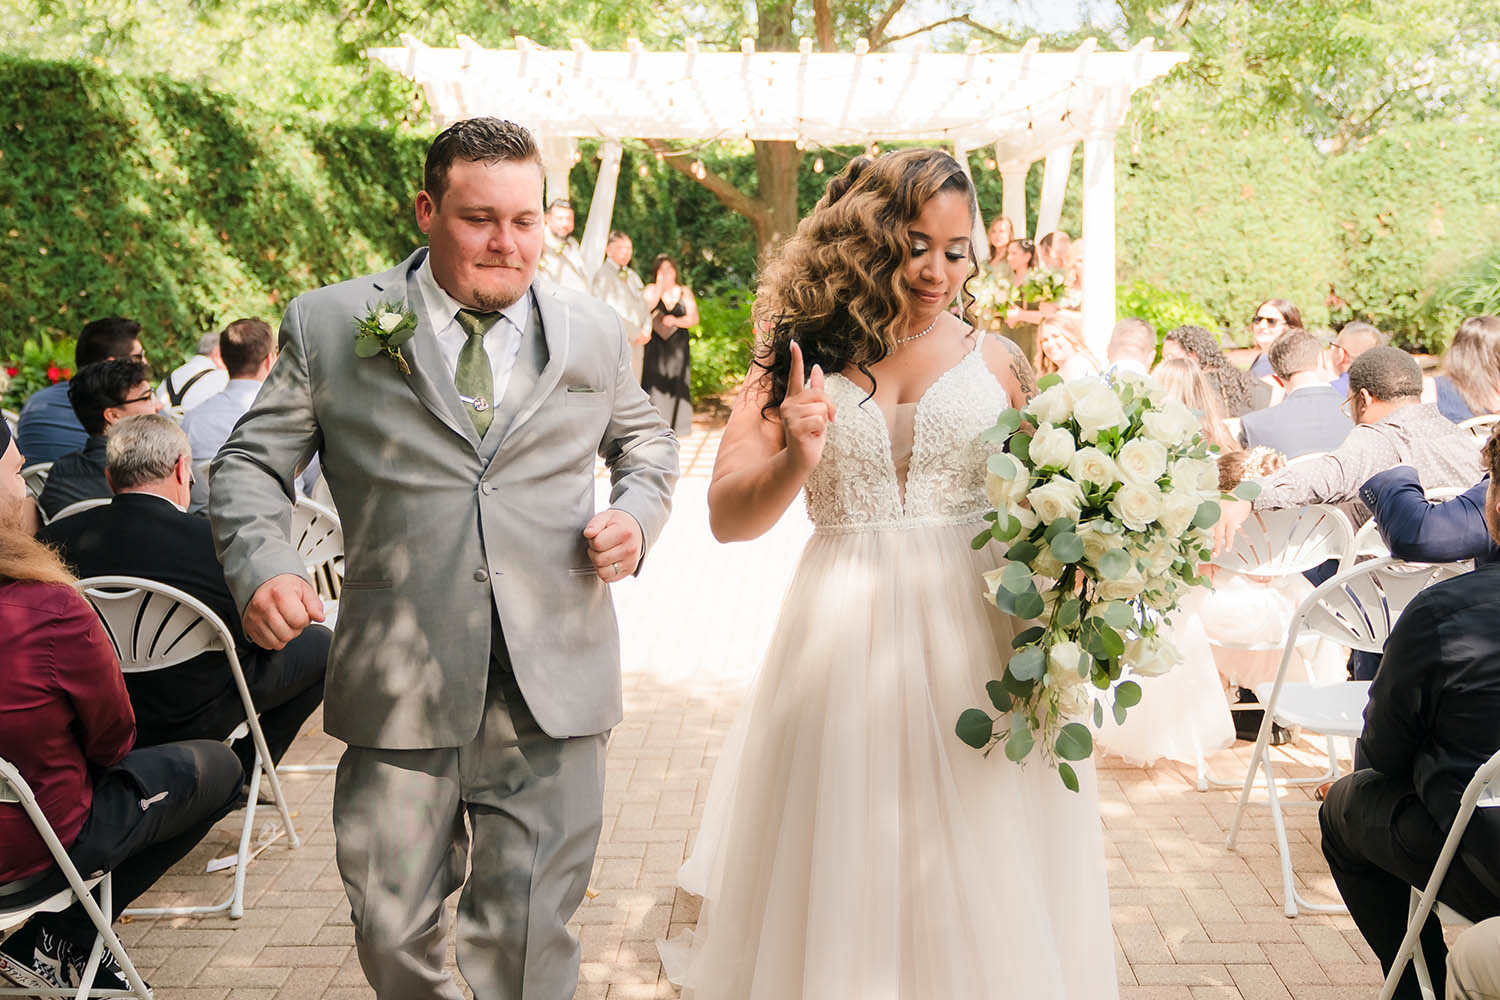 Bride and groom dancing down the aisle during their wedding reception at Orland Chateau in Orland Park, IL